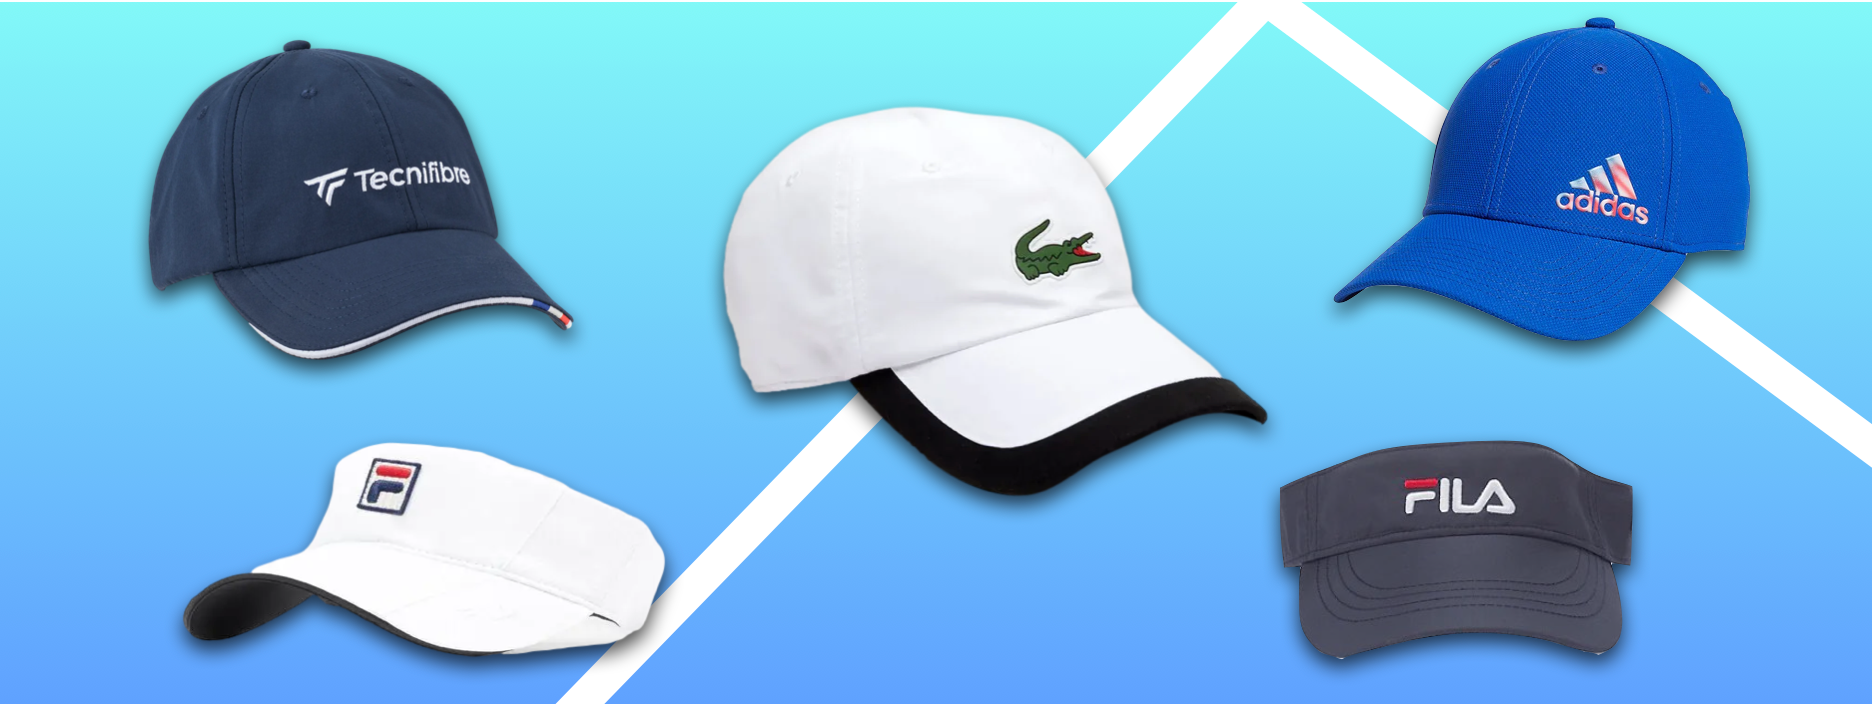 A comprehensive guide on tennis hats and visors for tennis players